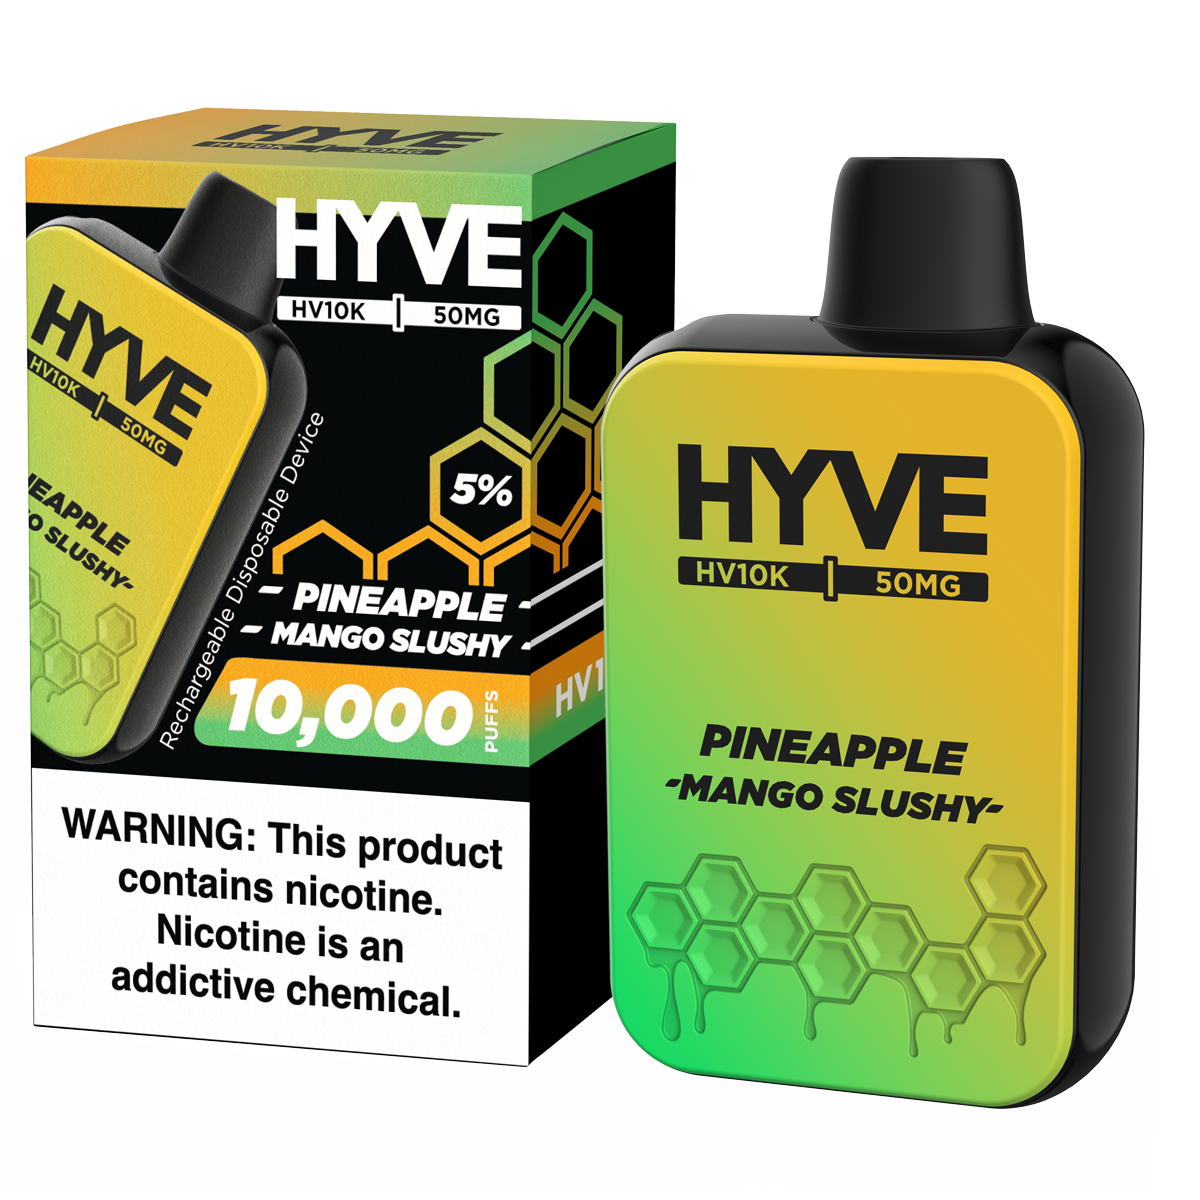 HYVE 18ml 50mg Disposable